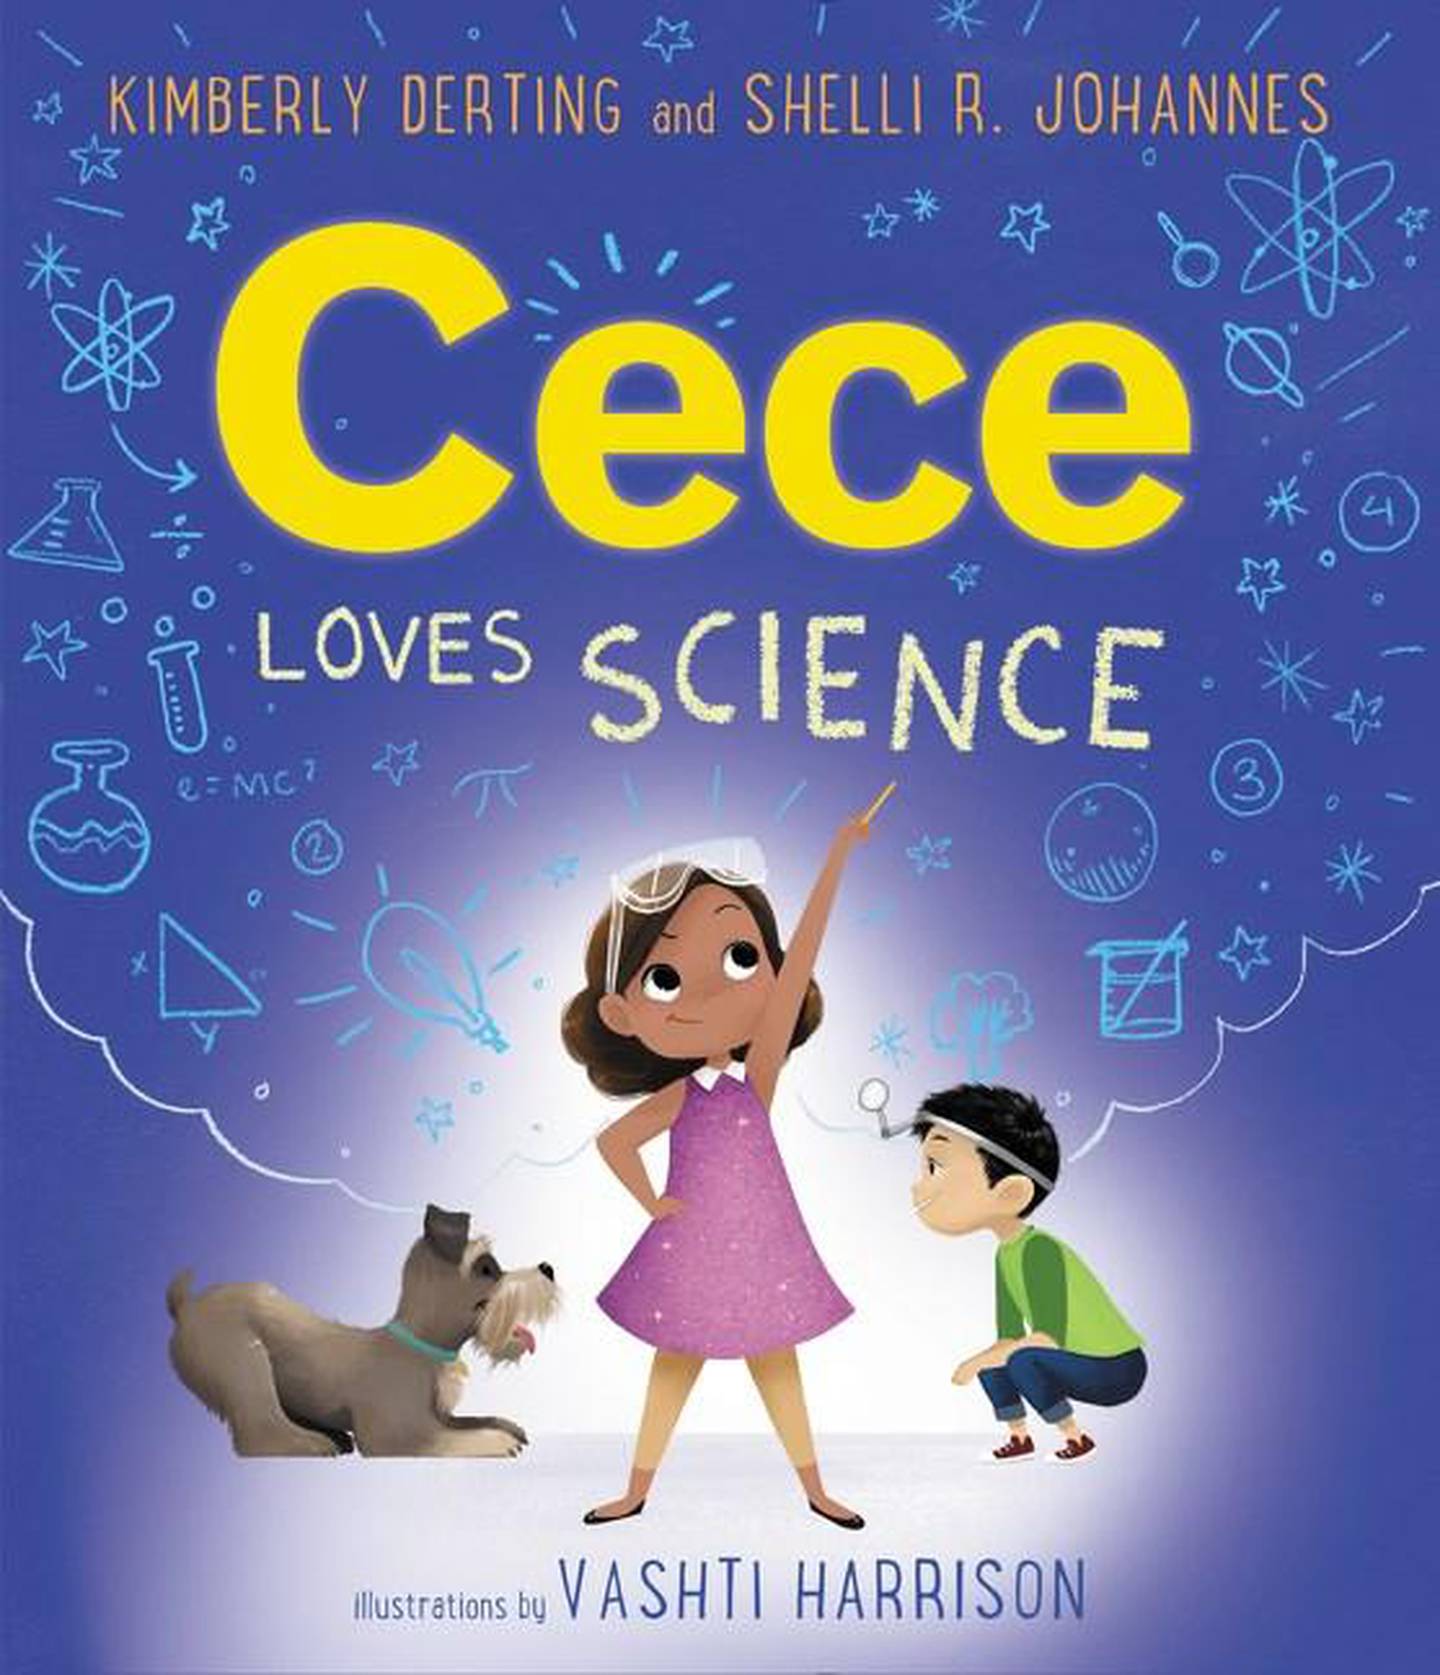 'Cece Love Science' written by Kimberly Derting and Shelli Johannes and illustrated by Vashti Harrison. 